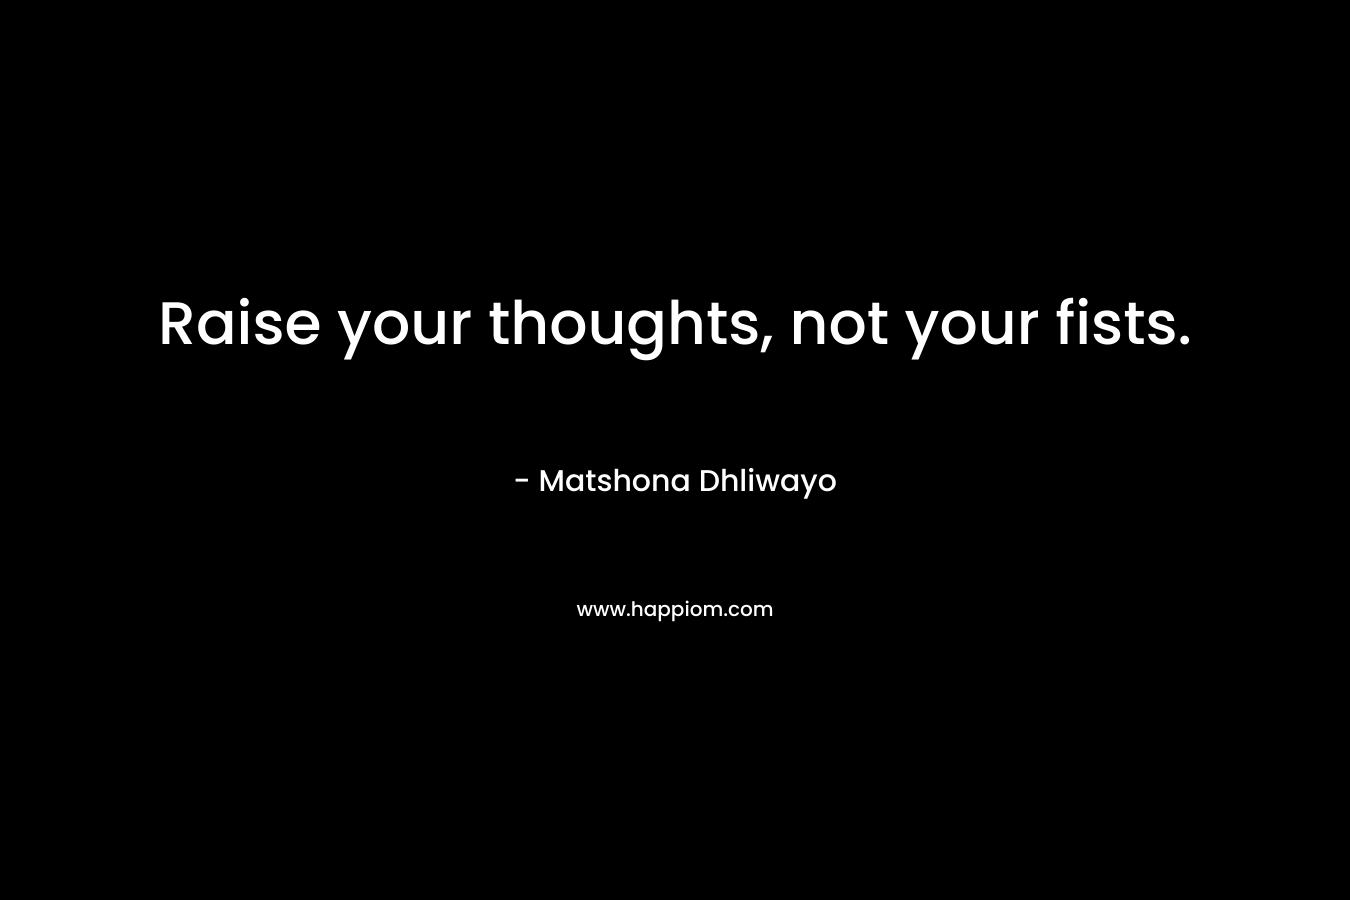 Raise your thoughts, not your fists. – Matshona Dhliwayo